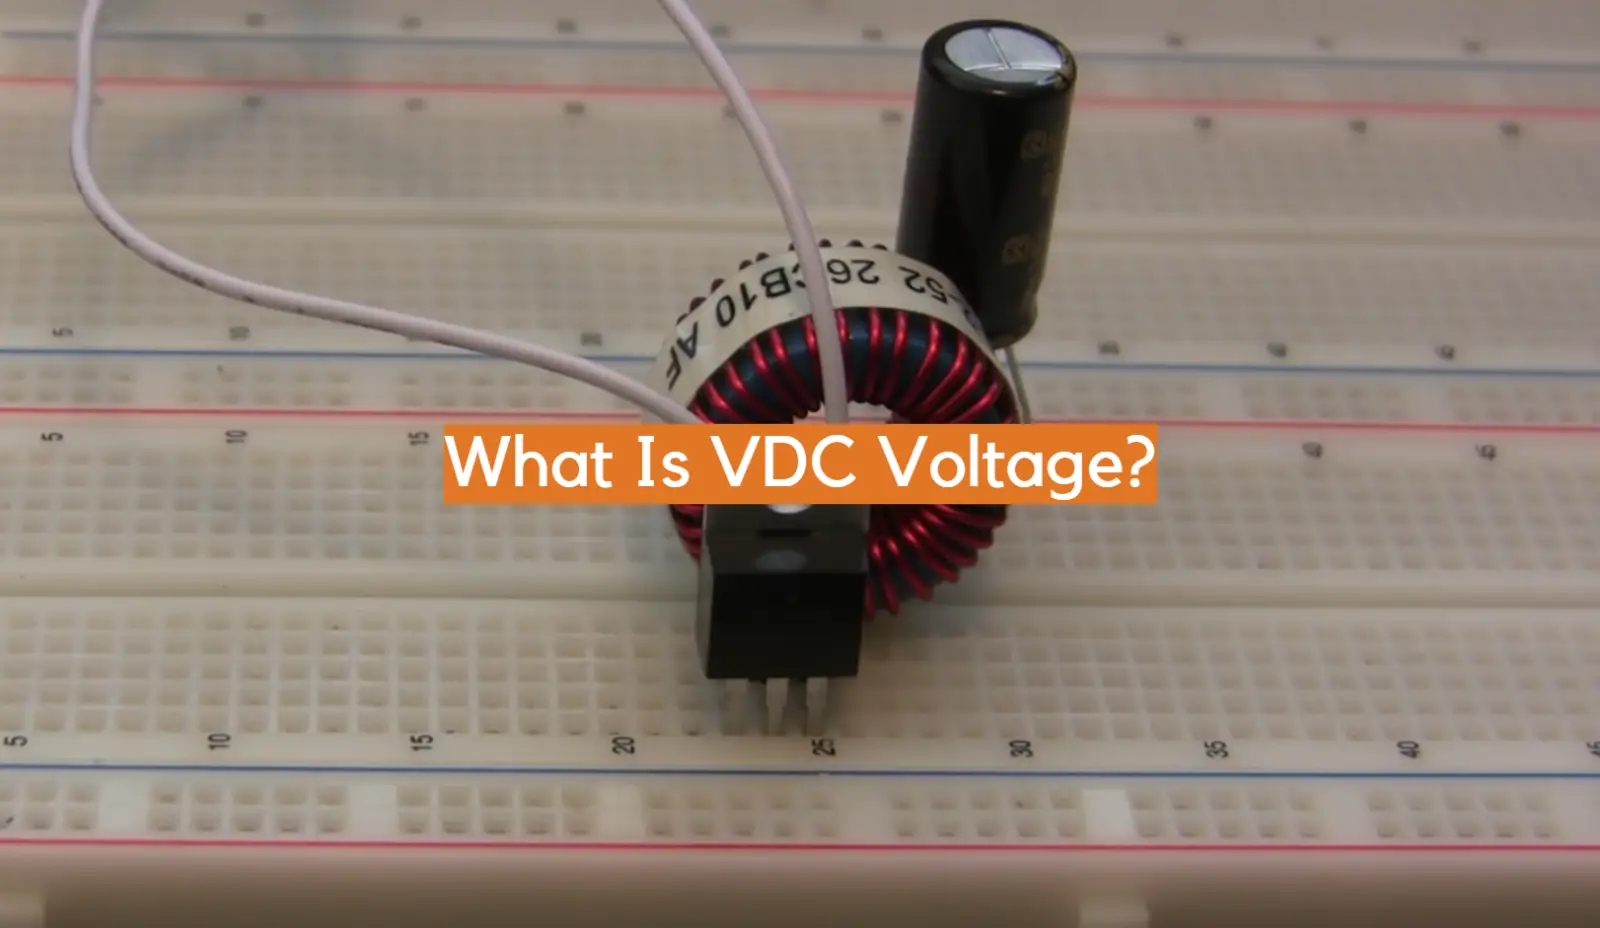 What Is VDC Voltage?